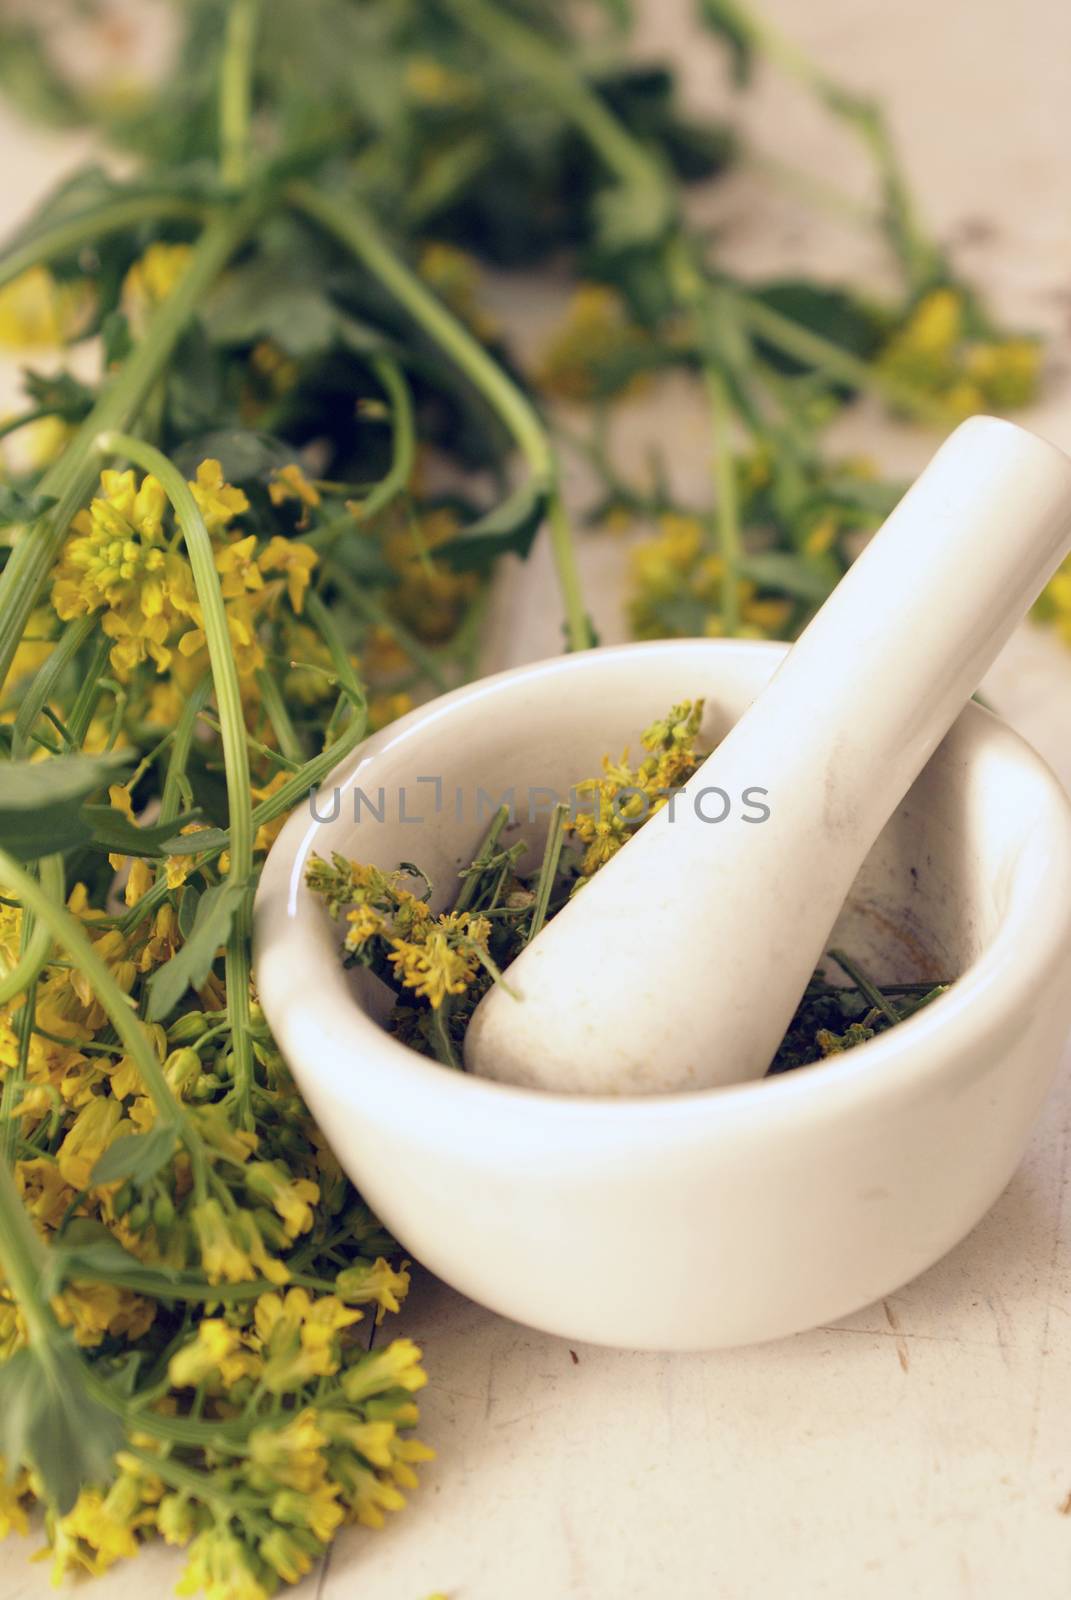 A closeup of some freshly picked Yellow Rocketcress, Barbarea Vulgaris, belonging to the mustard family of herbs.